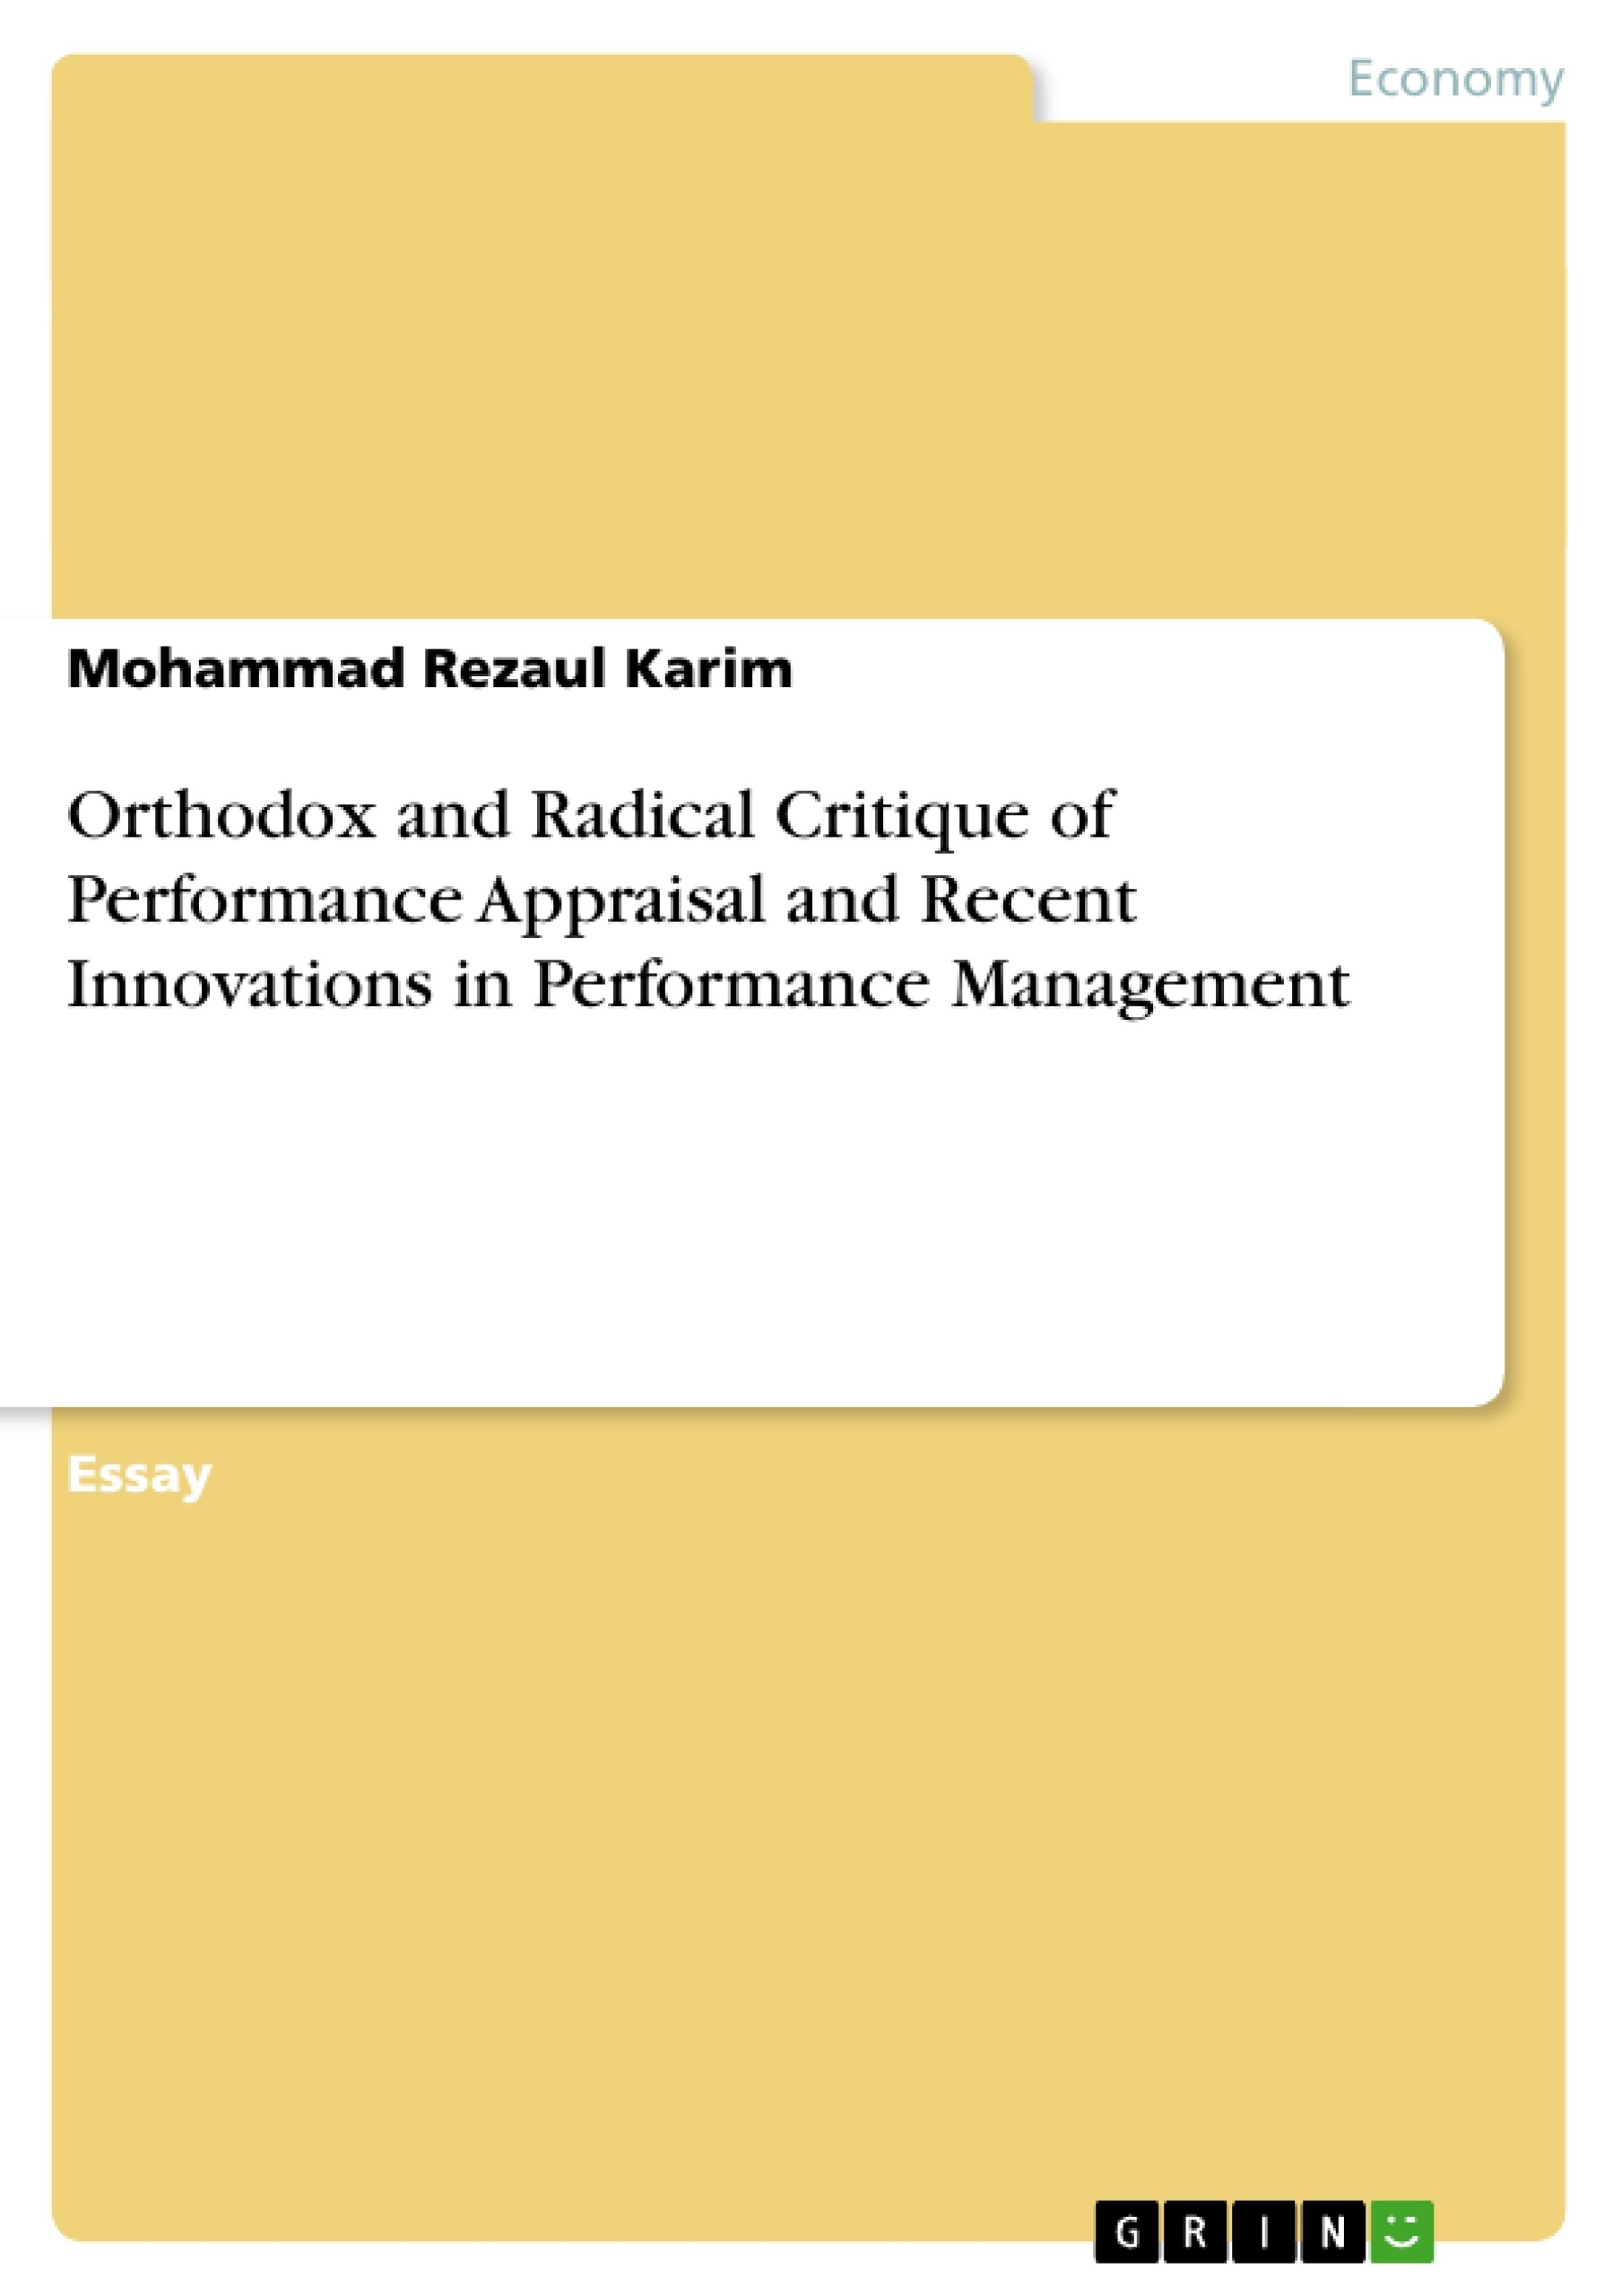 Title: Orthodox and Radical Critique of Performance Appraisal and Recent Innovations in Performance Management